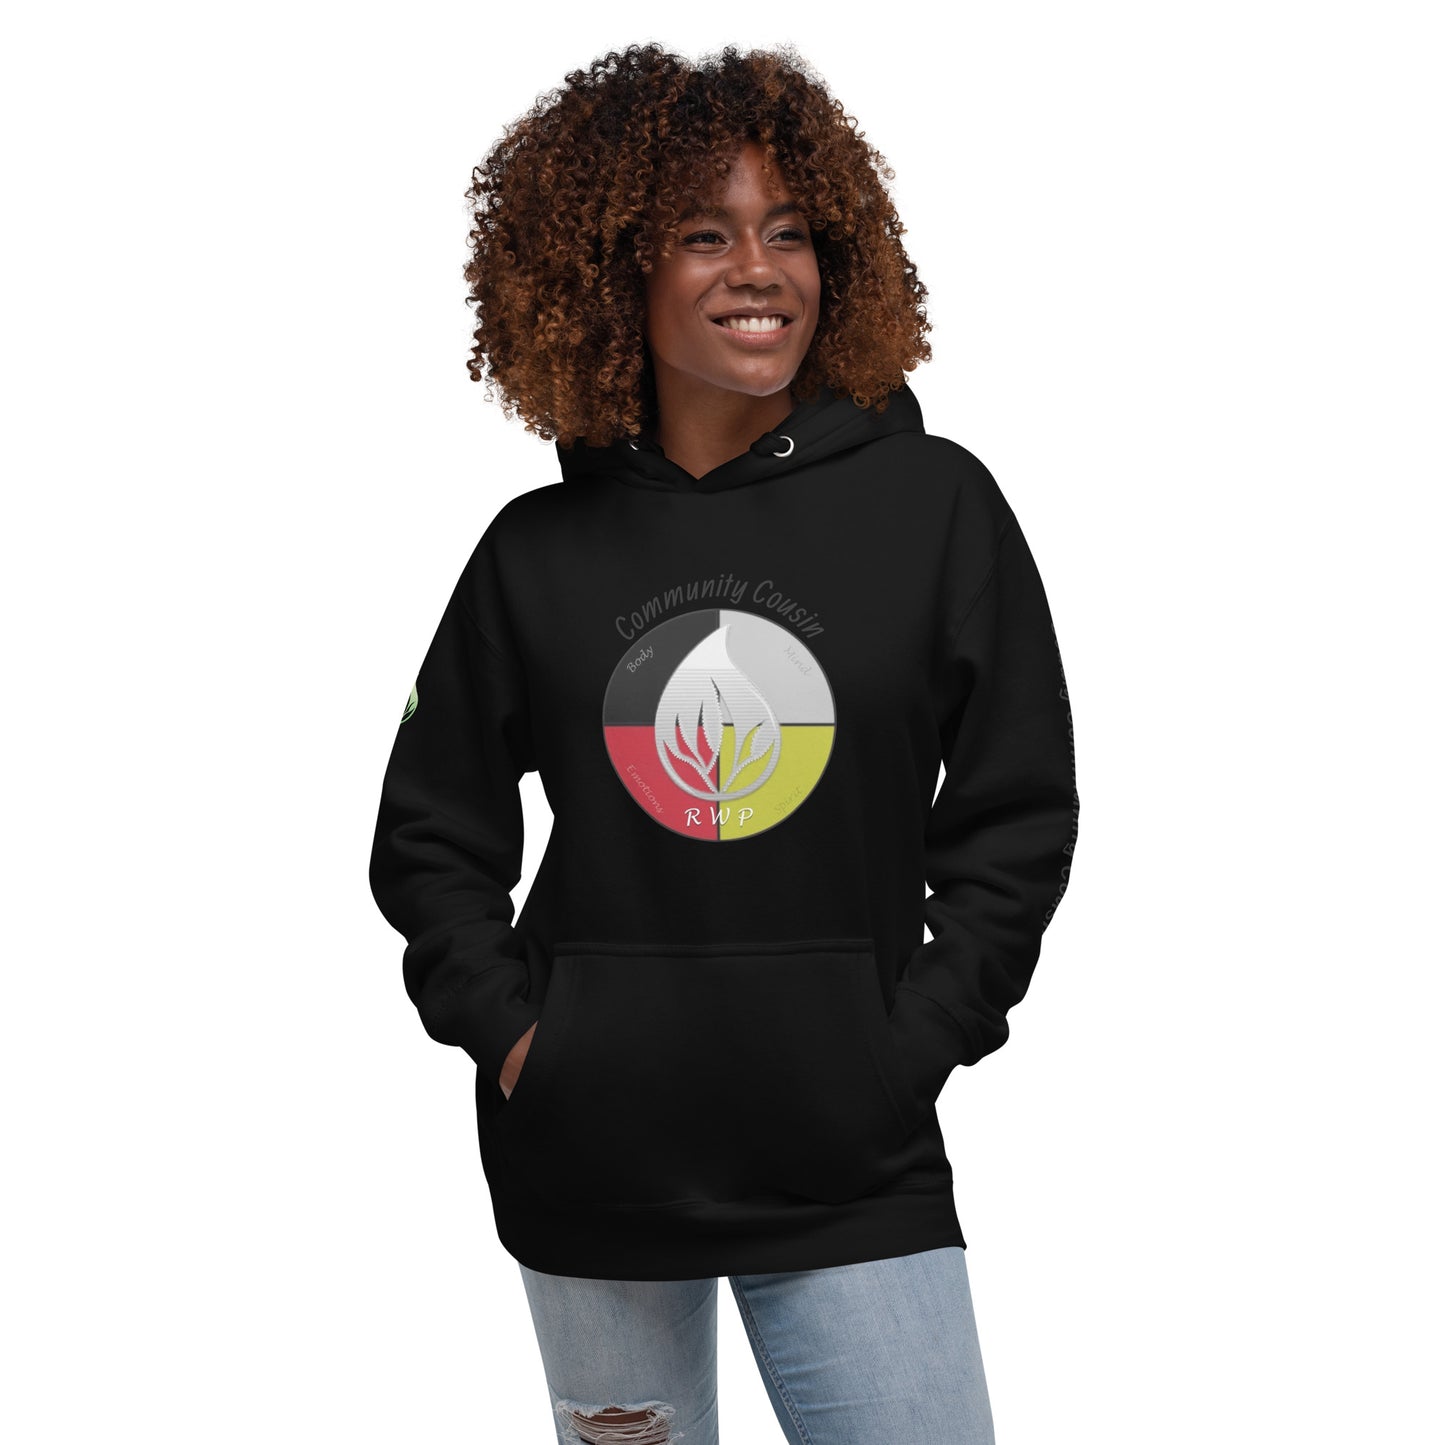 Community Cousin (Deadly) Unisex Hoodie